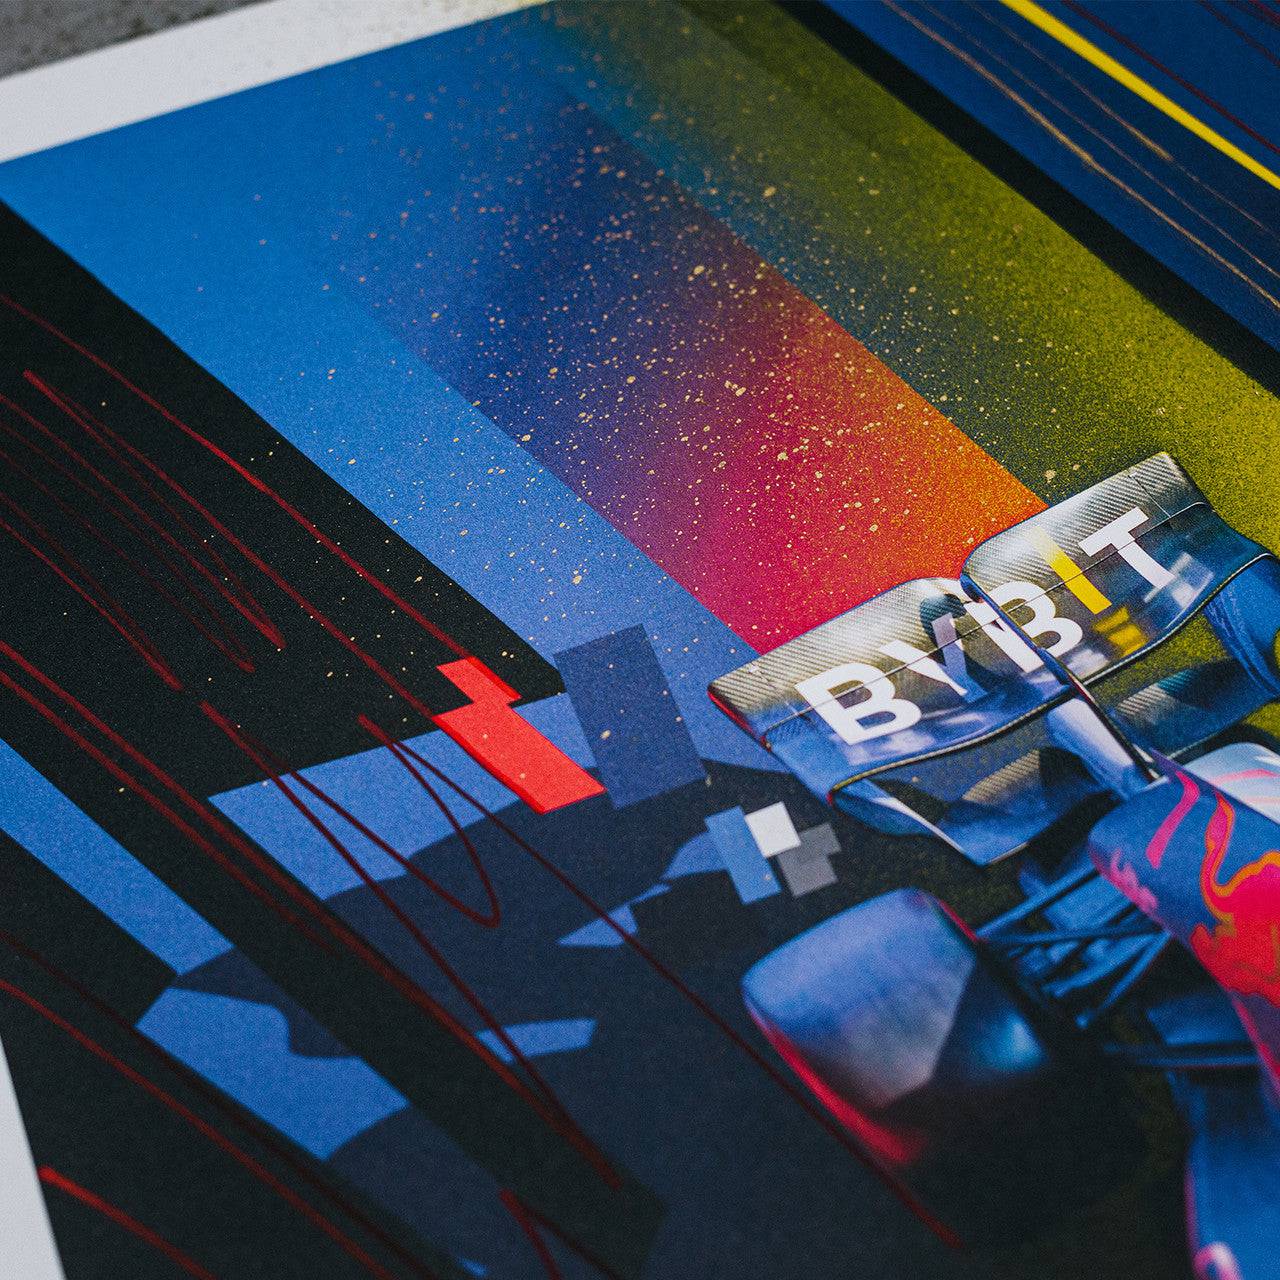 Oracle Red Bull Racing - Max Verstappen - Art to the Max - 2022 | Art Edition | #05/25